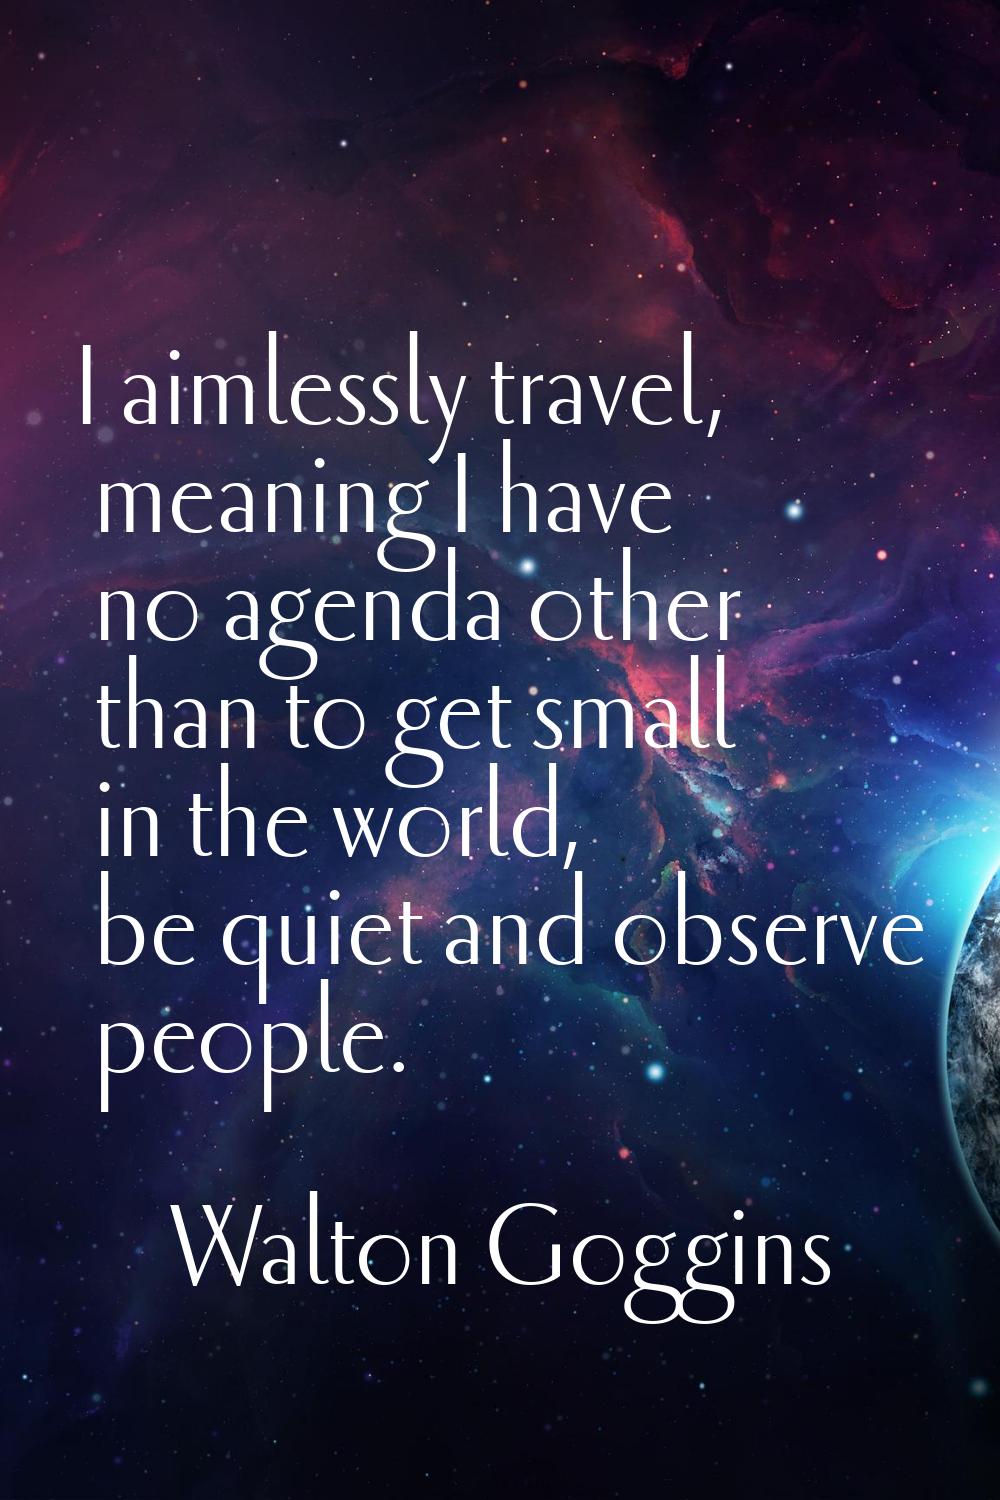 I aimlessly travel, meaning I have no agenda other than to get small in the world, be quiet and obs